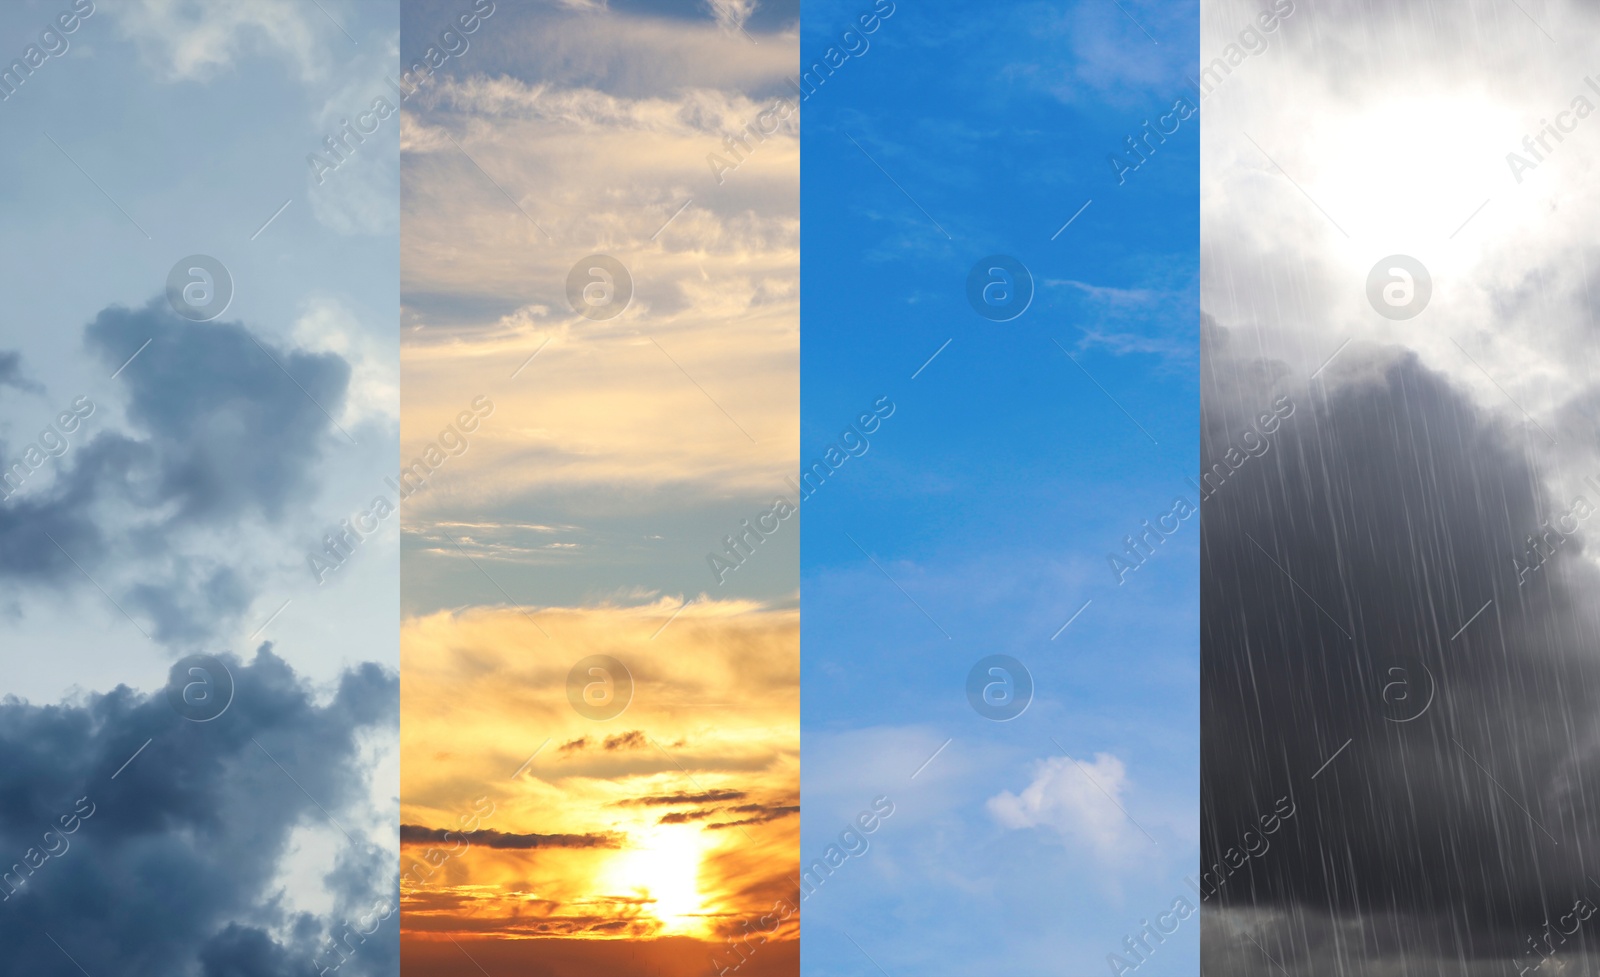 Image of Different weather conditions due to season changing. Collage with photos of sky